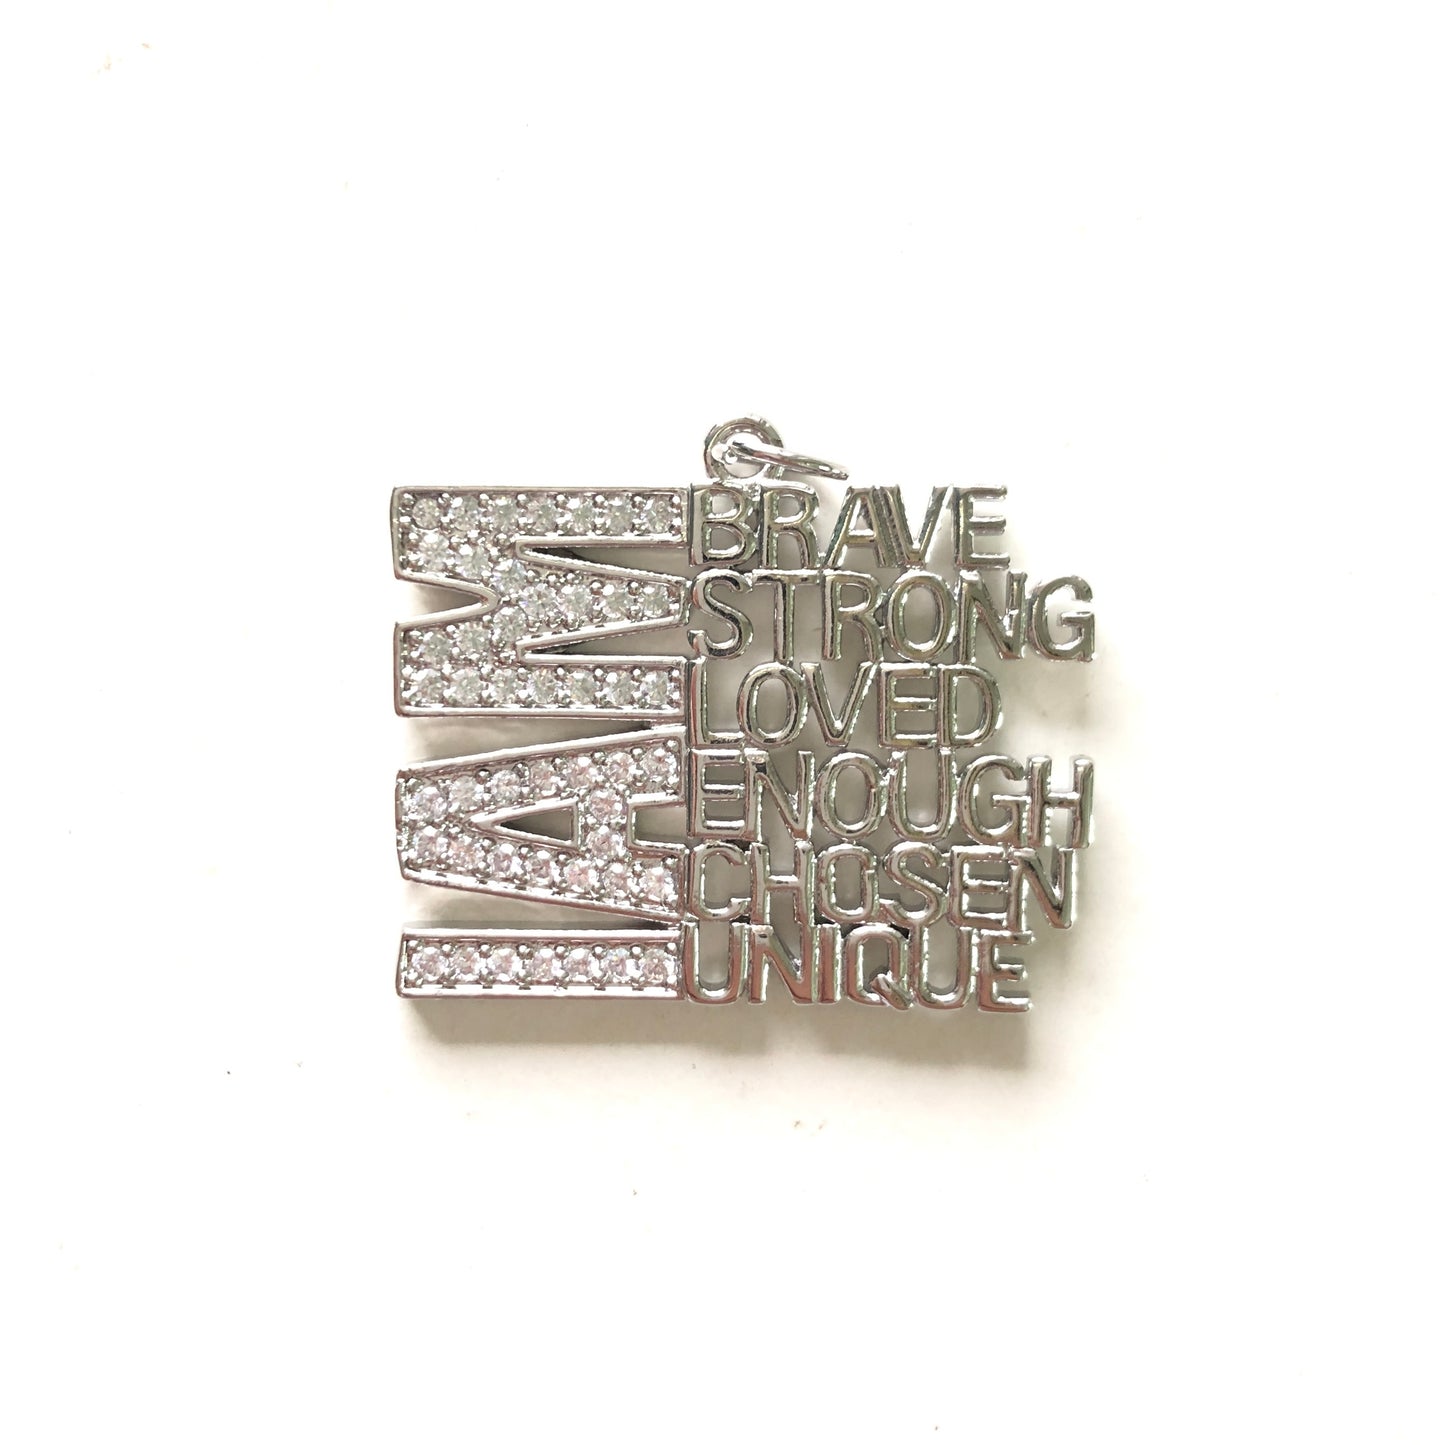 10pcs/lot CZ I Am Brave Strong Loved Enough Chosen Unique Word Charms Silver CZ Paved Charms New Charms Arrivals Words & Quotes Charms Beads Beyond